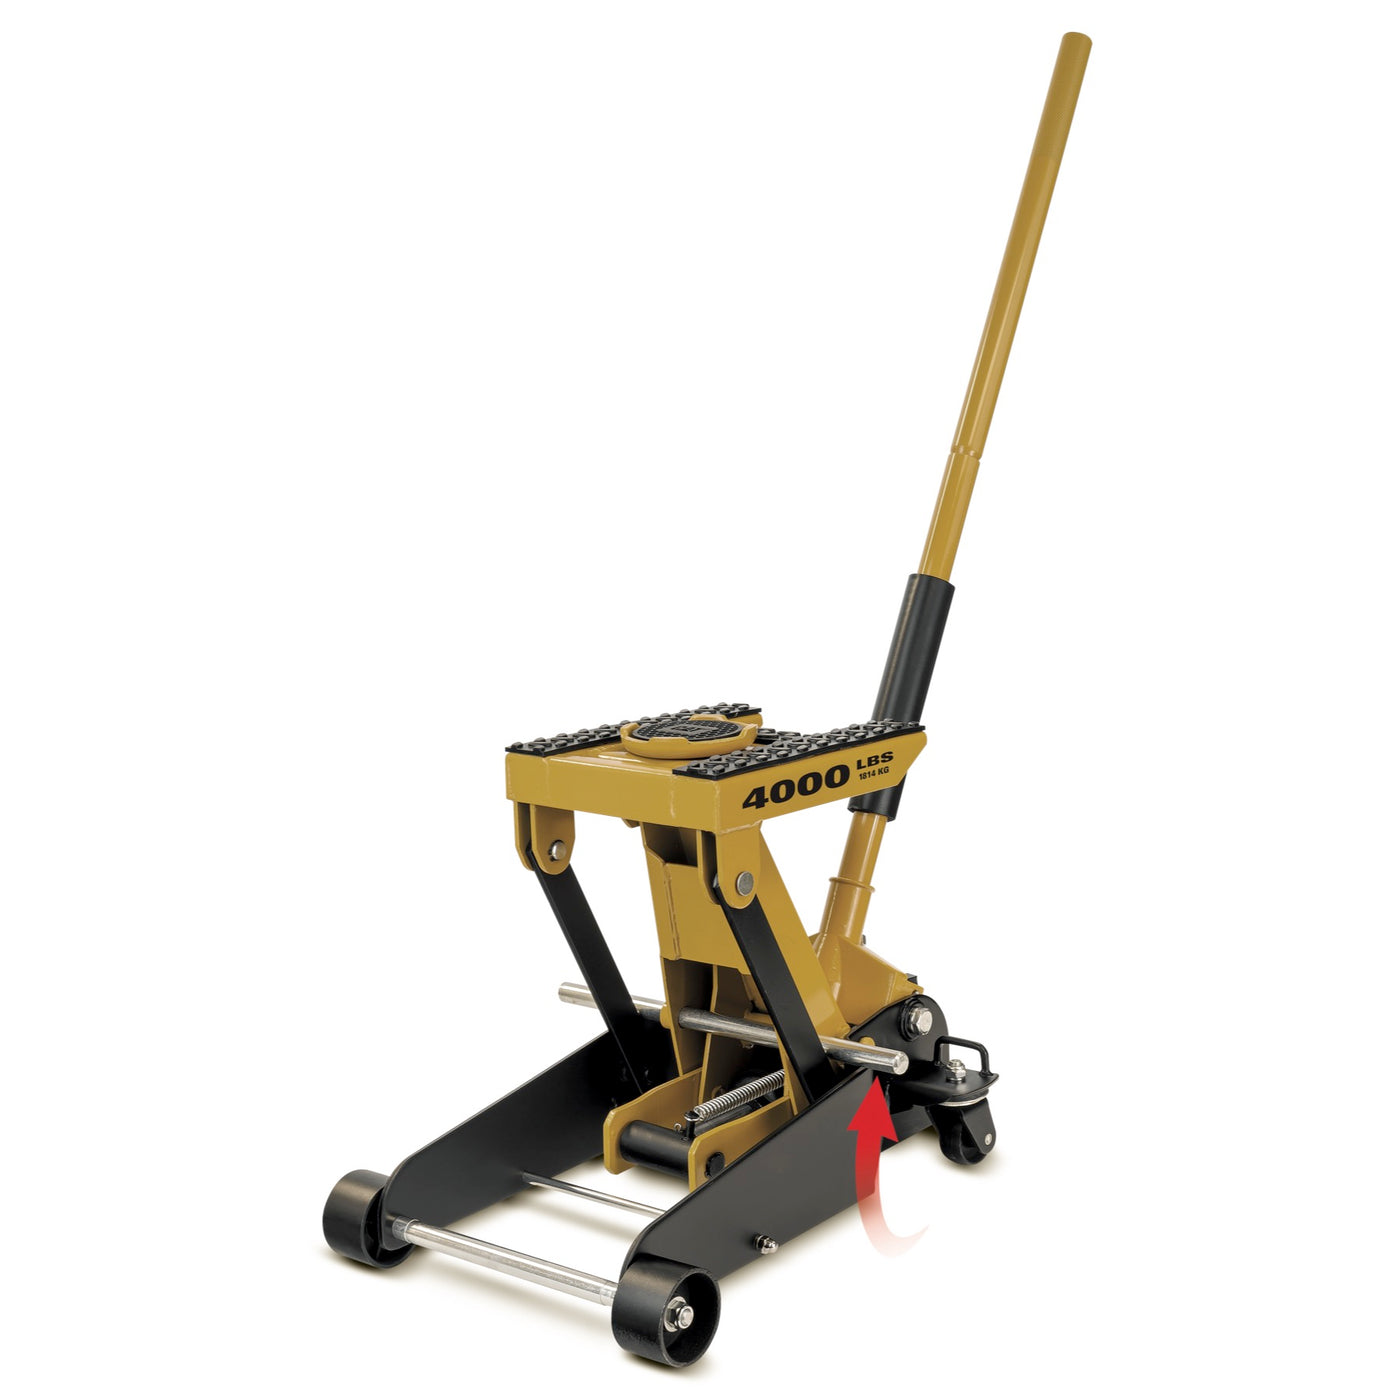 4000 Lb. 3-in-1 Garage Floor and ATV Jack with Tie-Down Straps